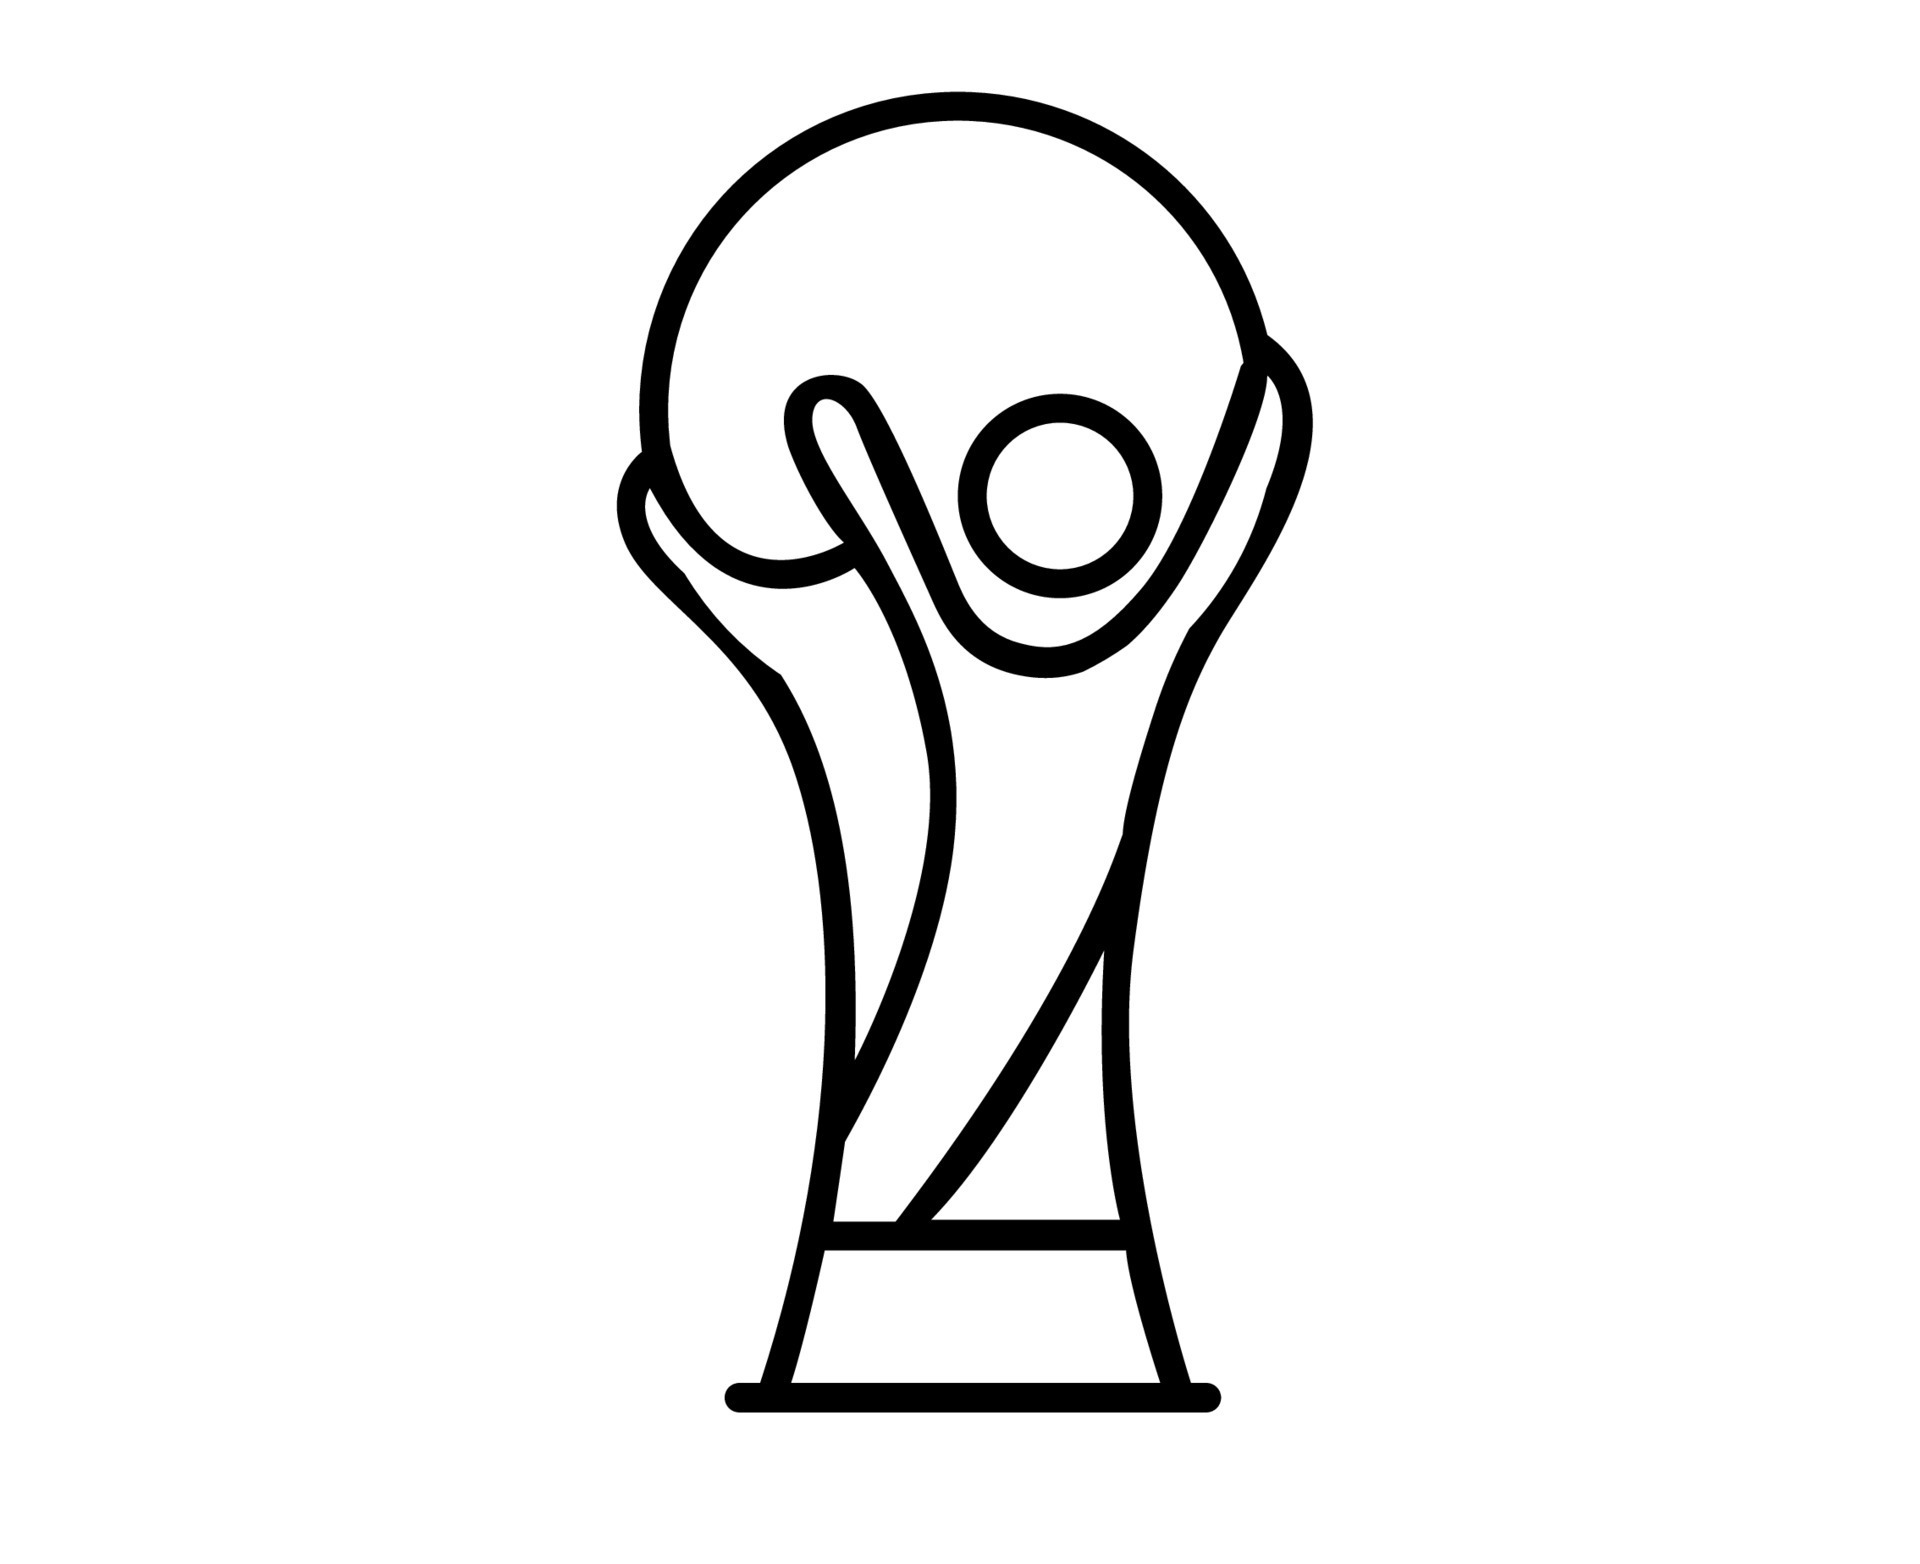 Your MLS-centric guide to the Qatar 2022 World Cup draw | MLSSoccer.com